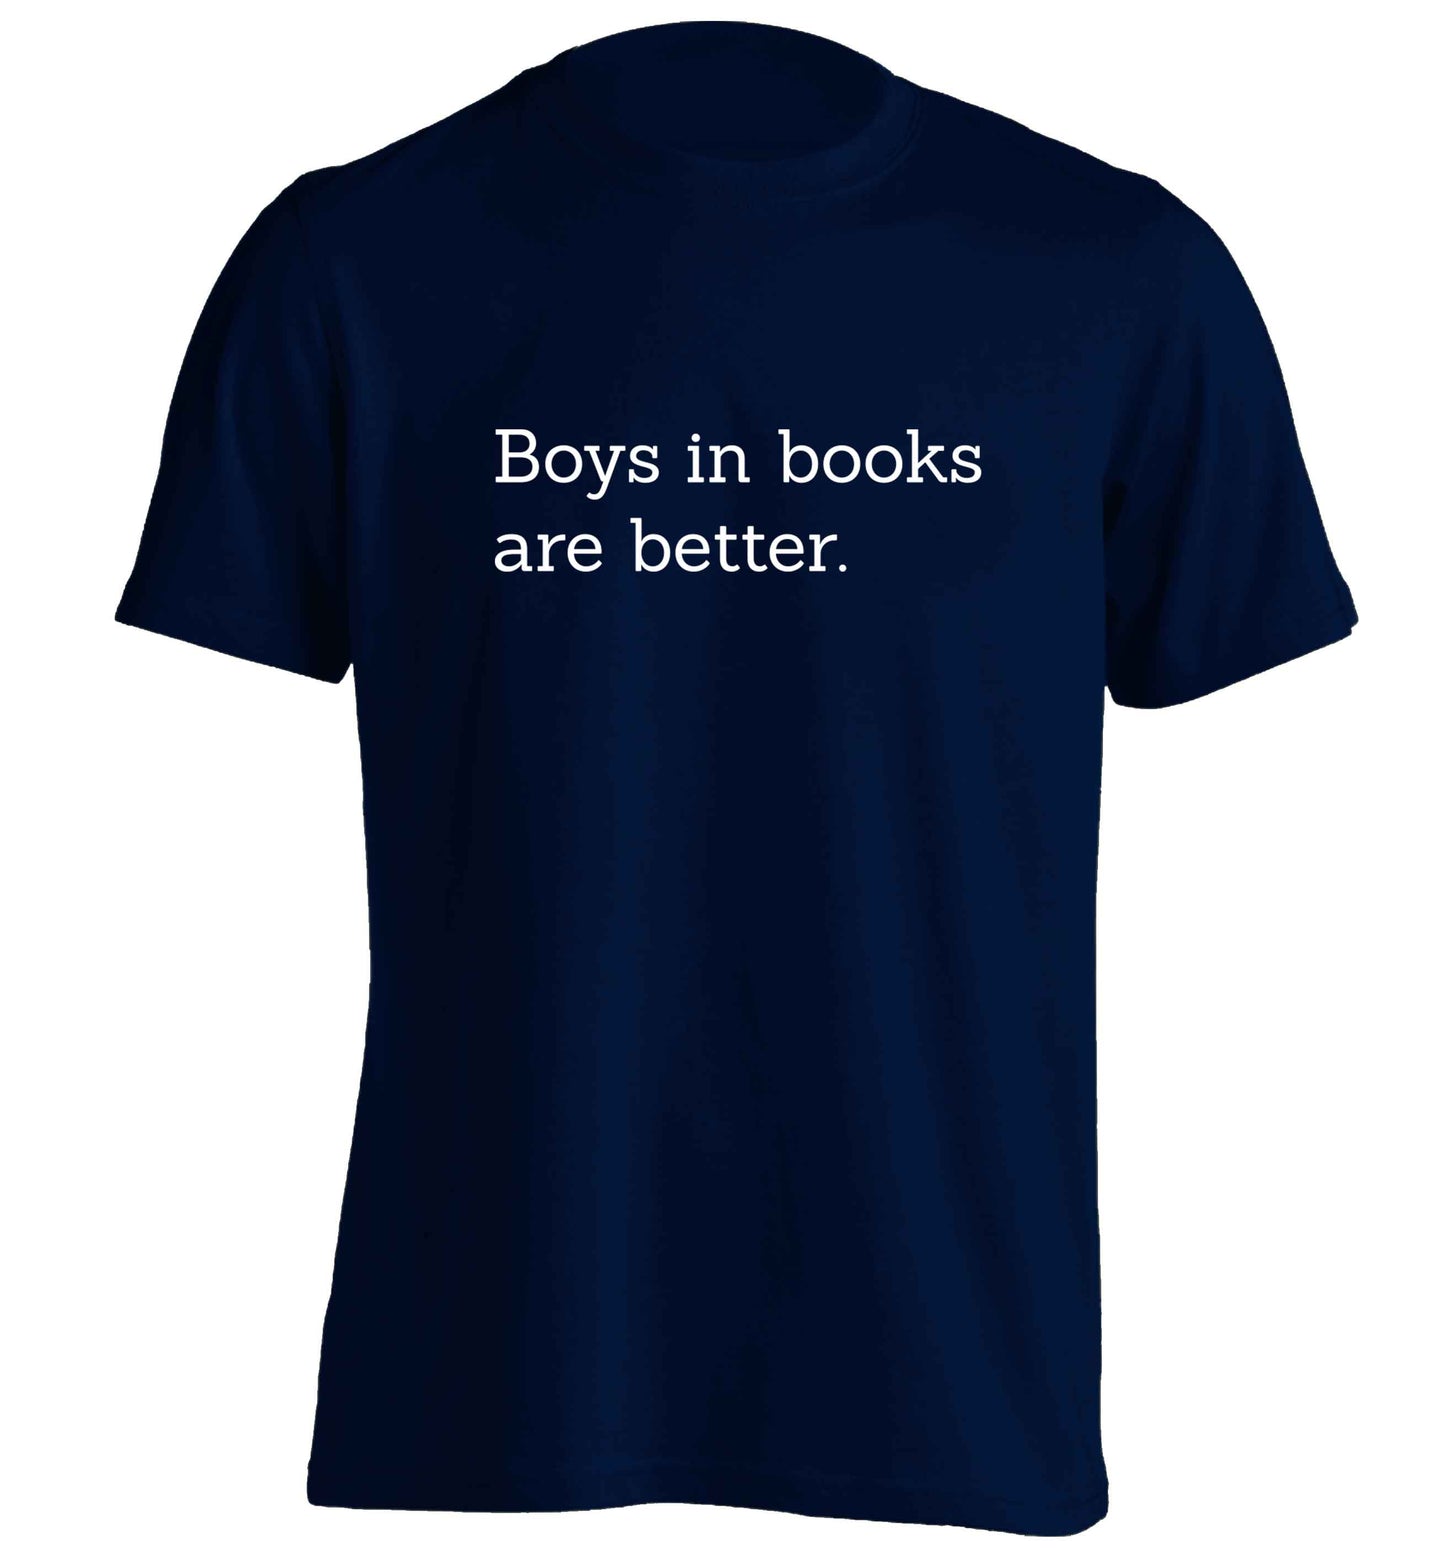 Boys in books are better adults unisex navy Tshirt 2XL